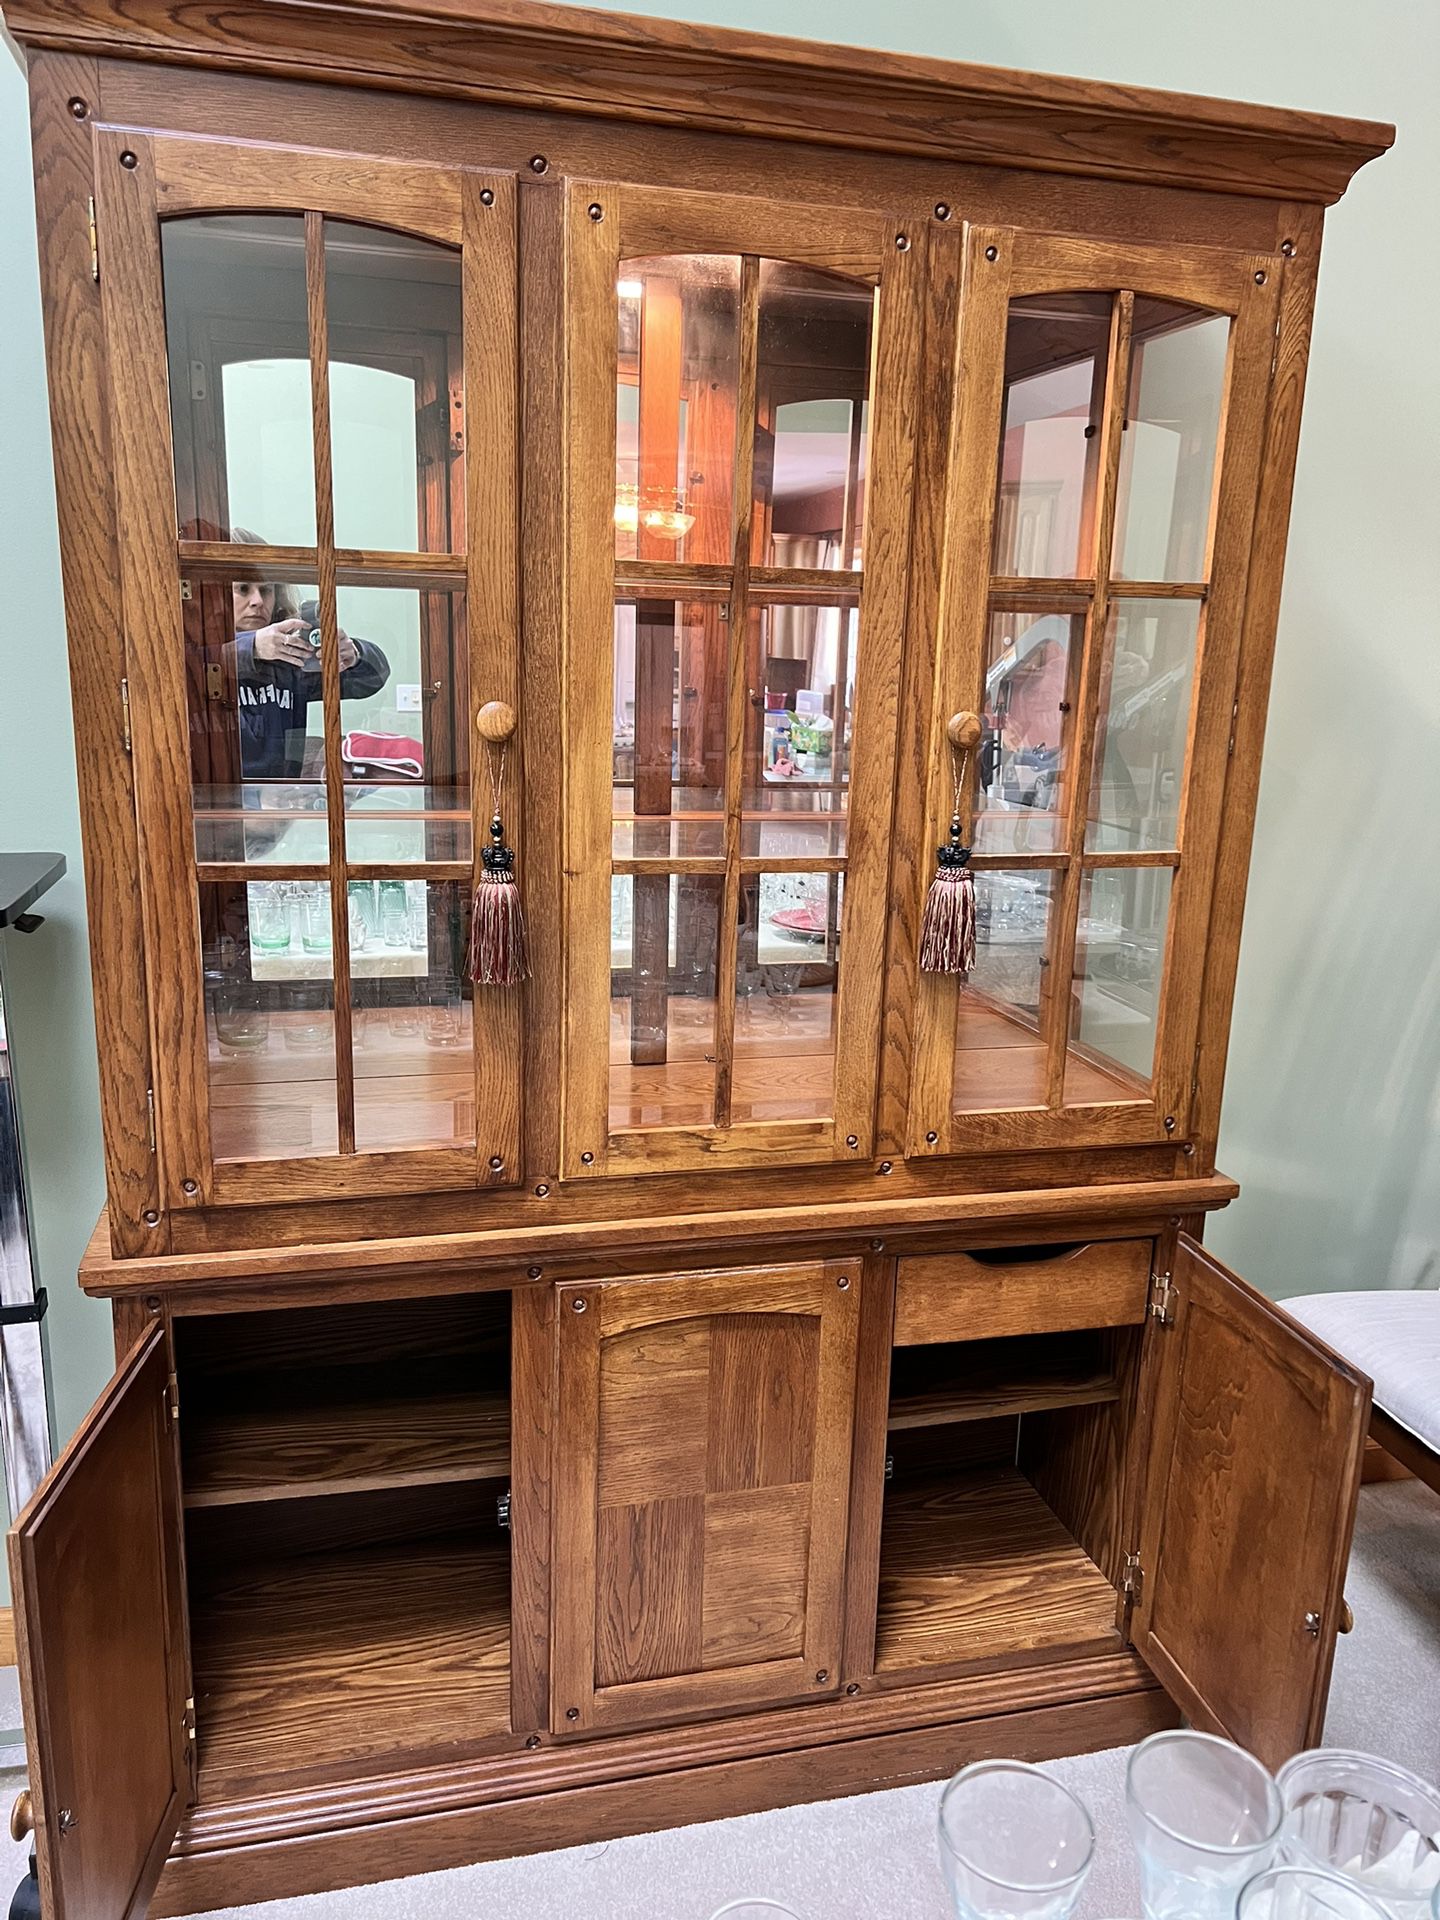 China Cabinet With lighting *PRICE DROP 👀*